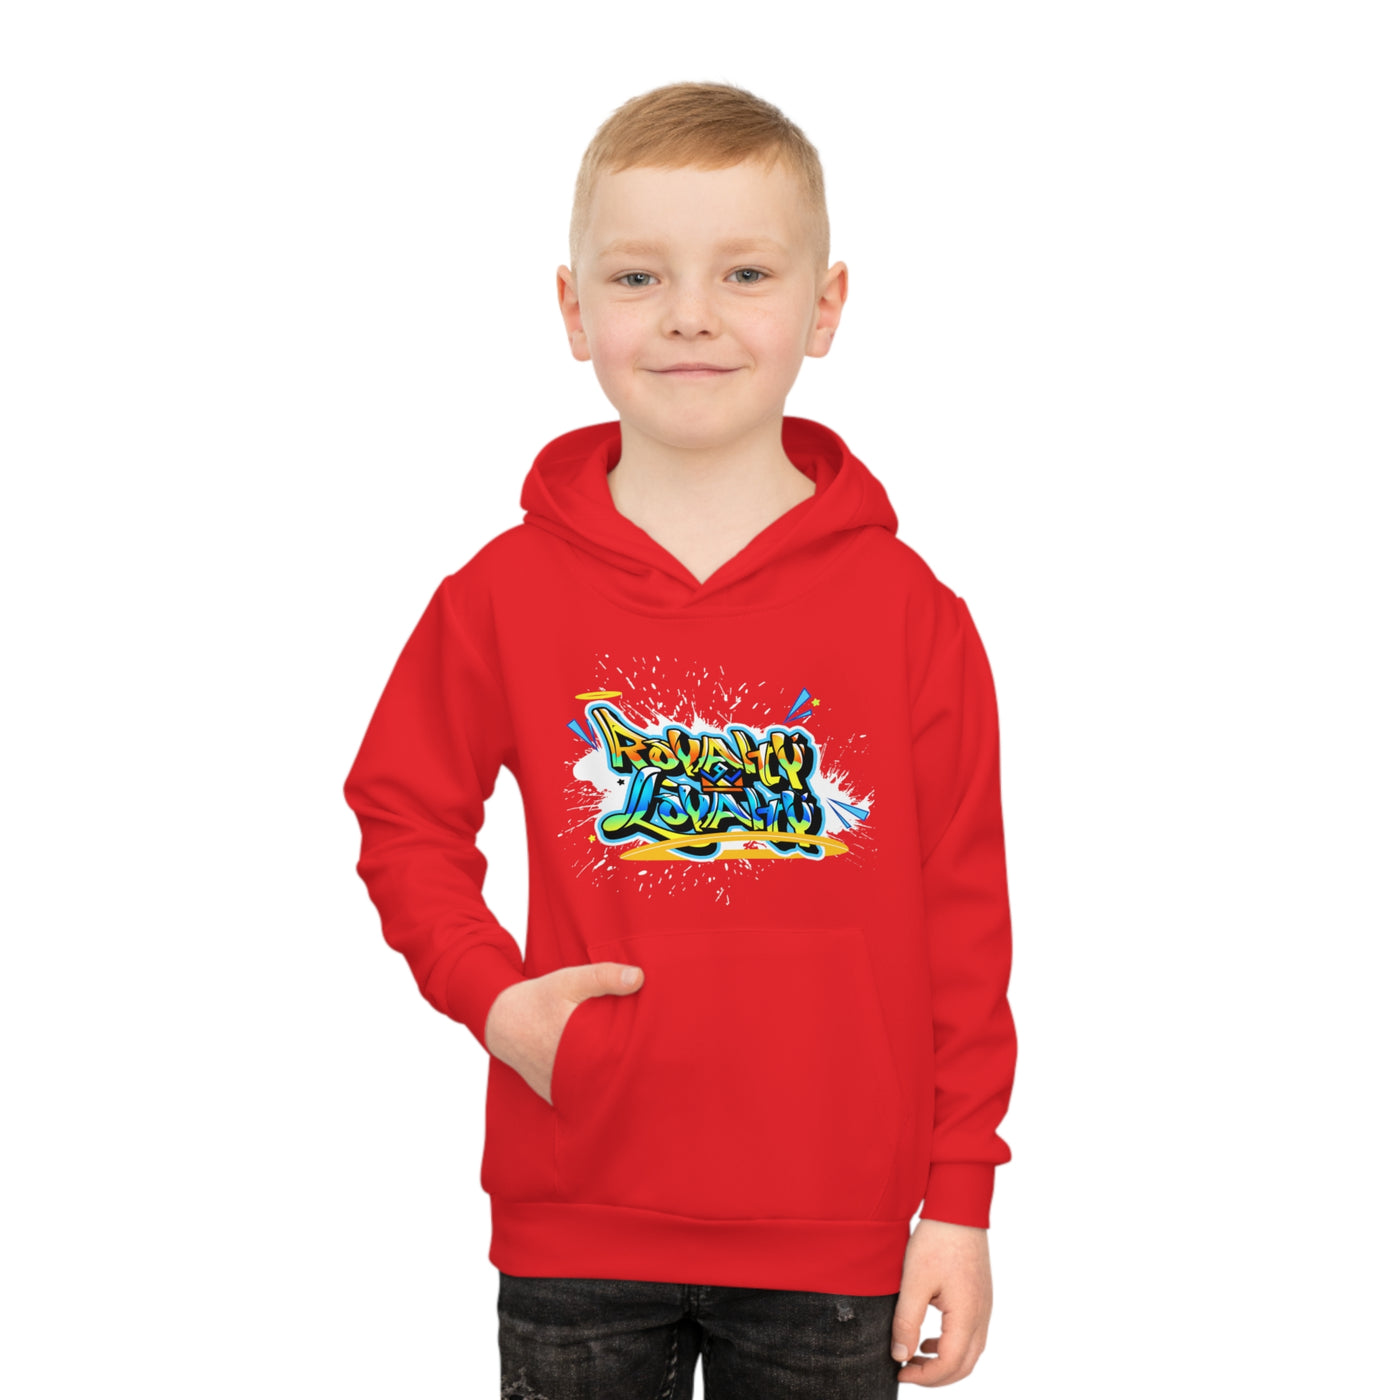 Royalty & Loyalty Kids Hoodie (Red) Sublimation